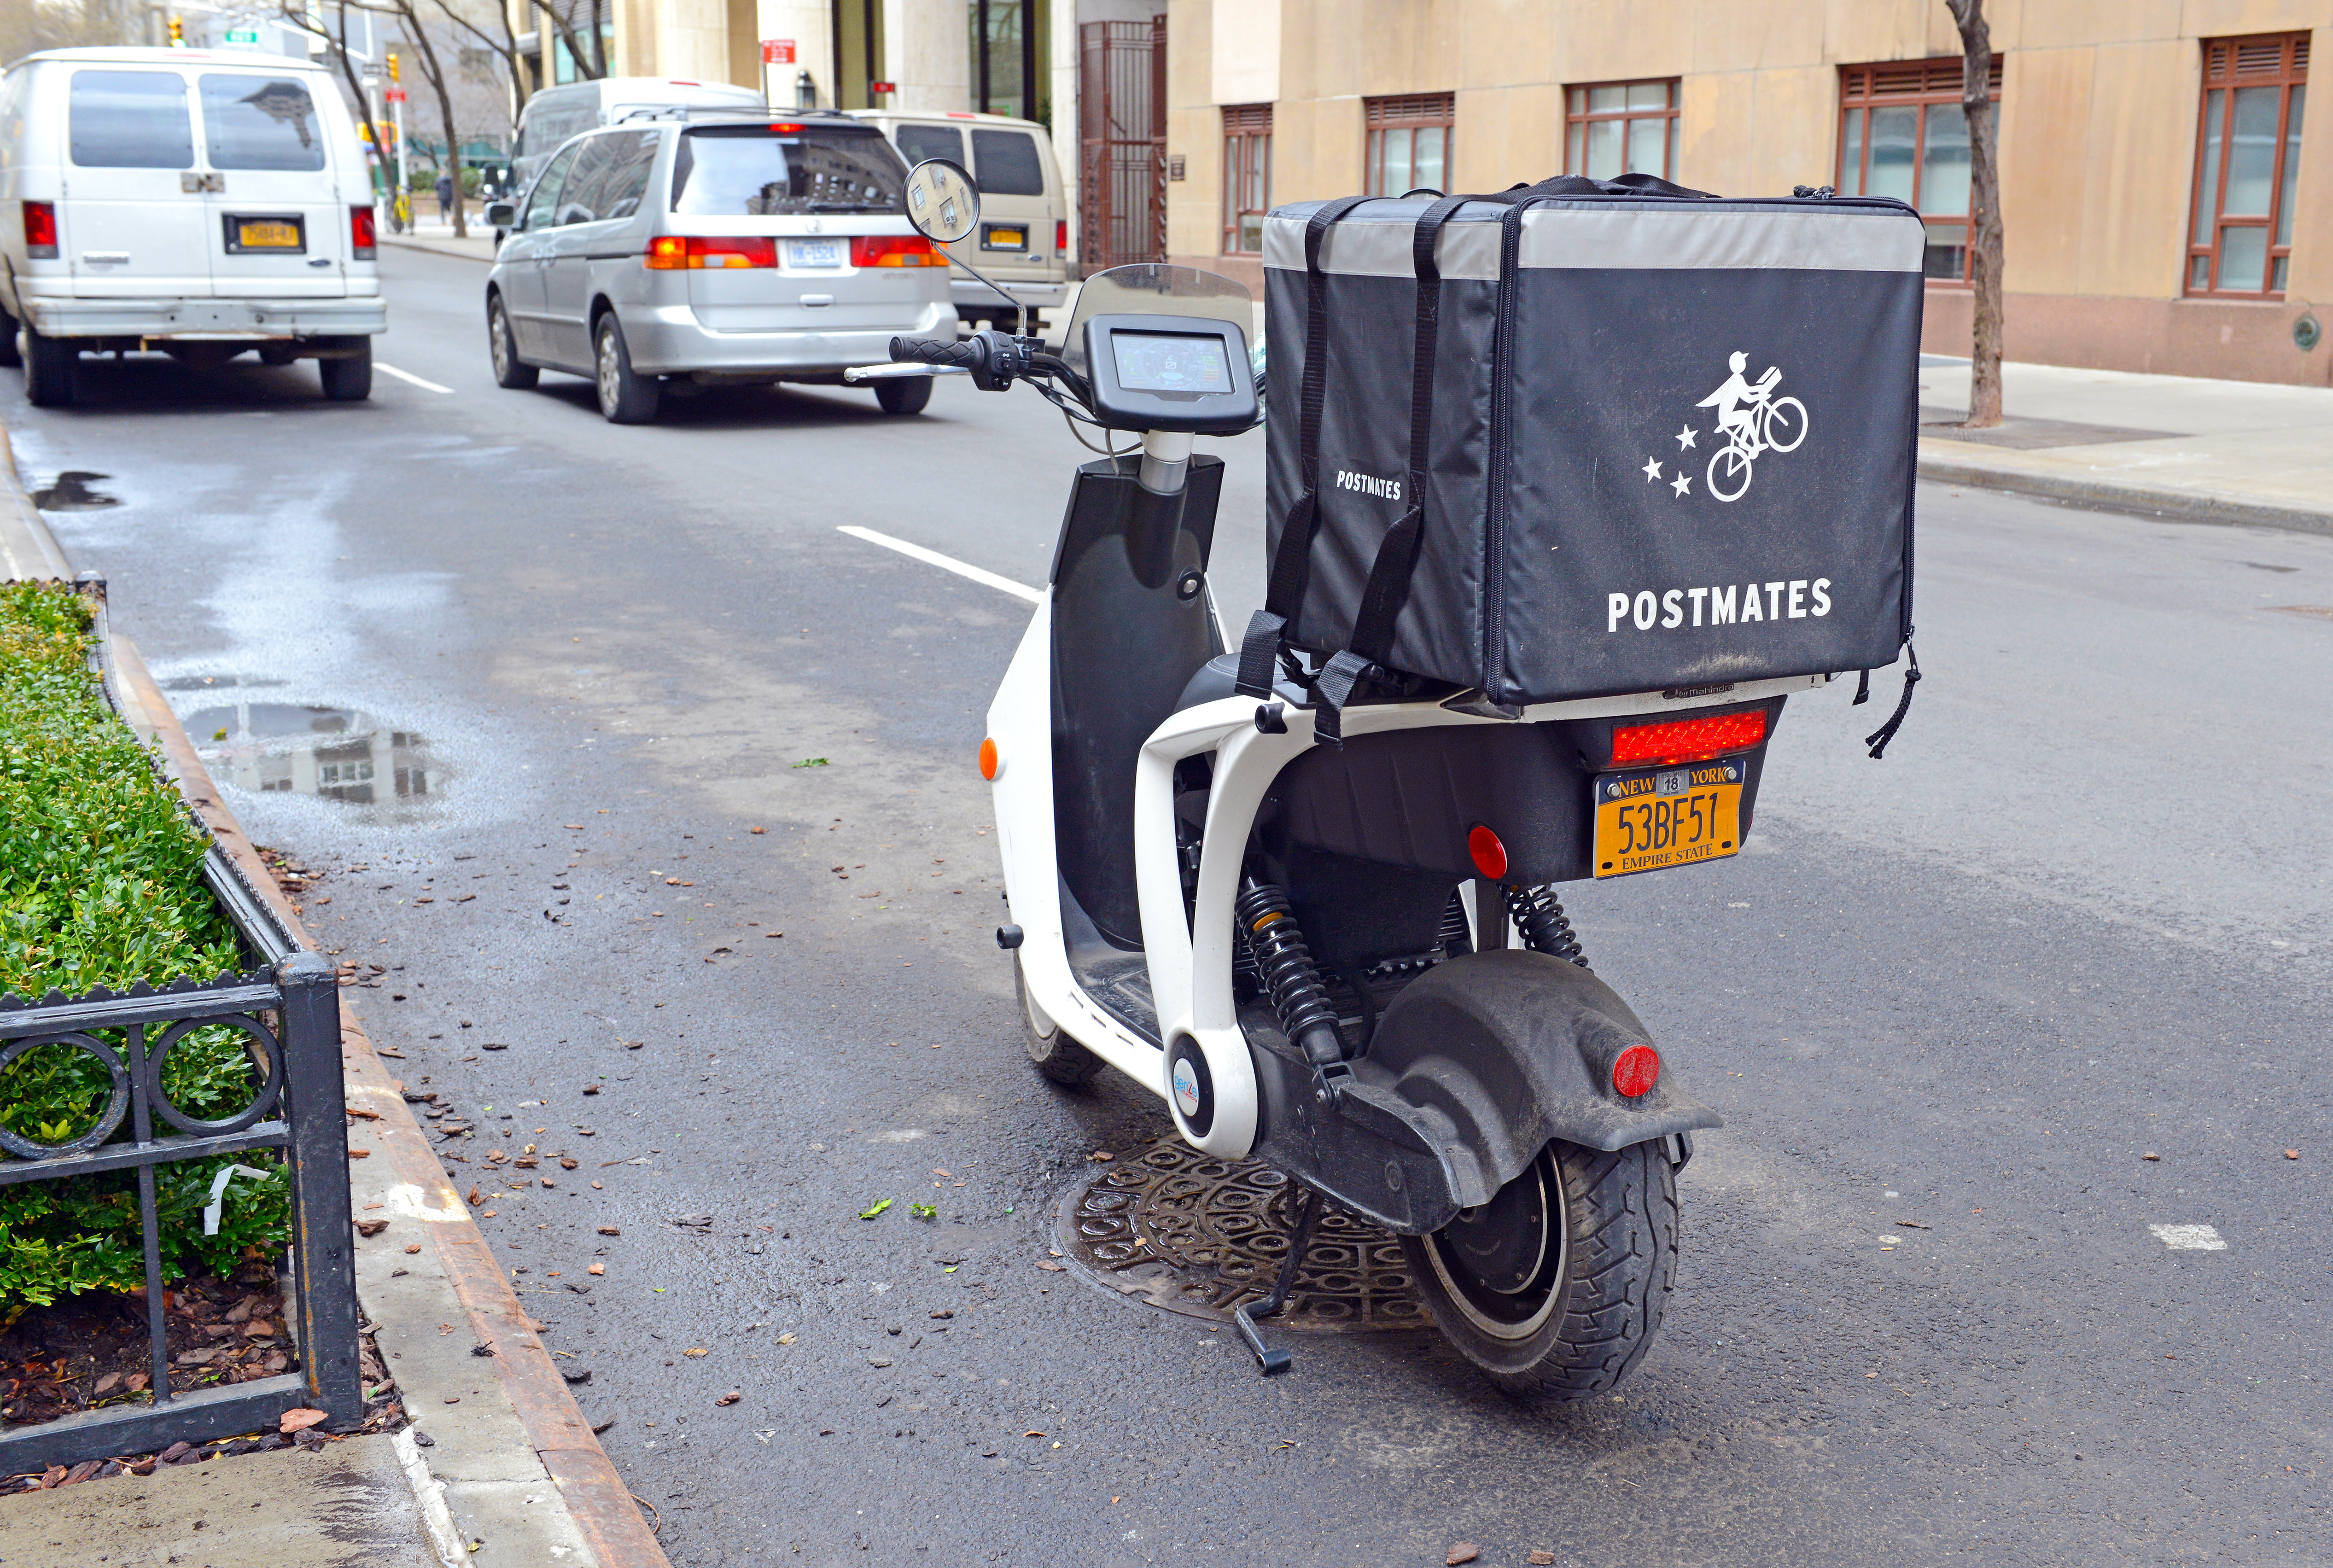 A motorbike parked on the street with a Postmates delivery bag attached to the back.